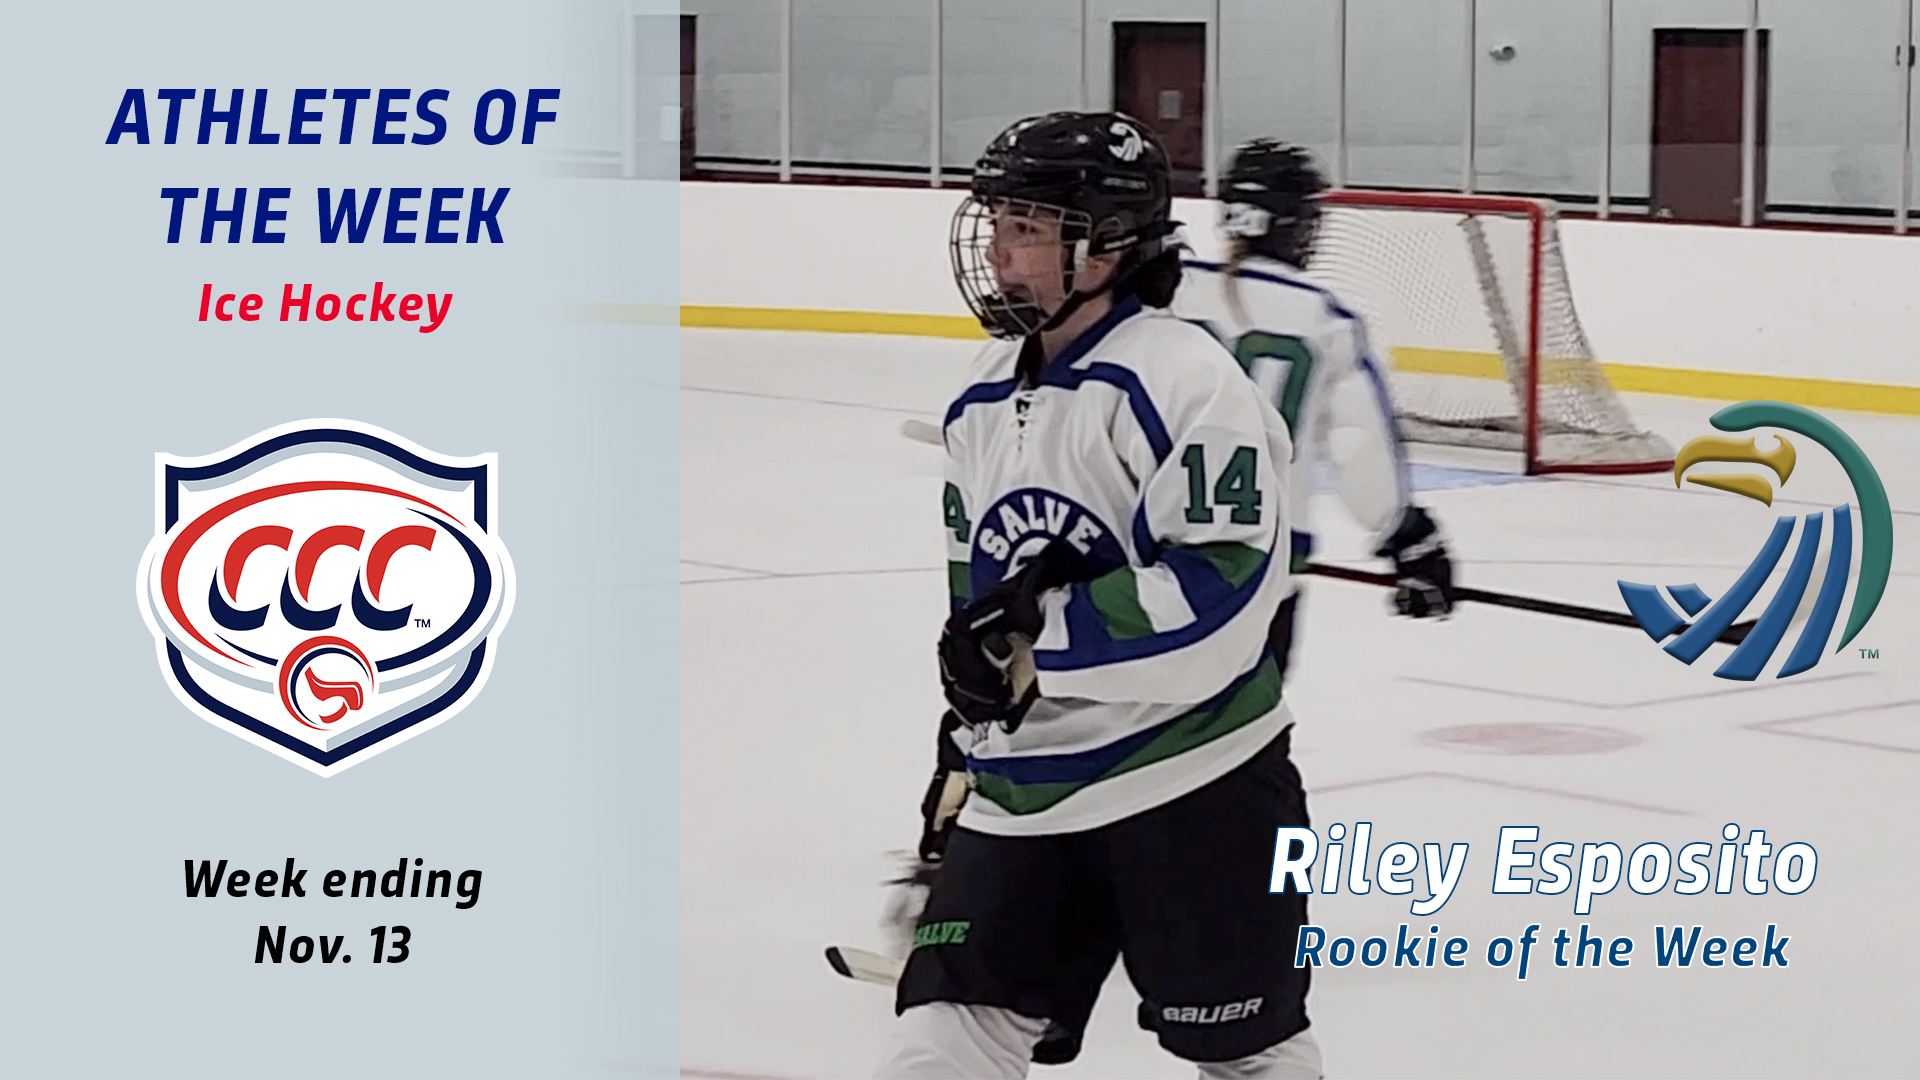 Riley Esposito was named CCC Rookie of the Week.